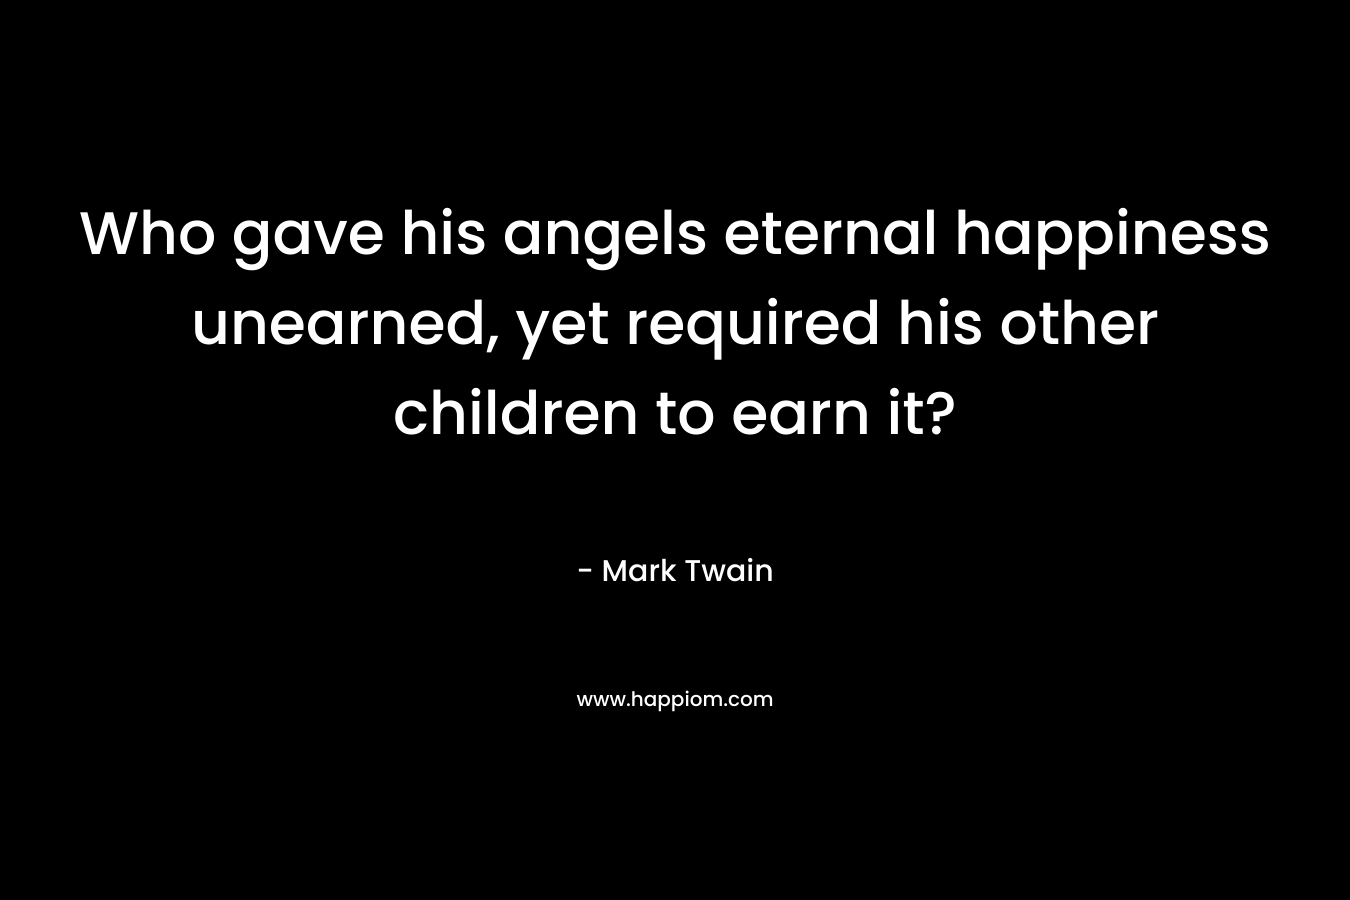 Who gave his angels eternal happiness unearned, yet required his other children to earn it? – Mark Twain